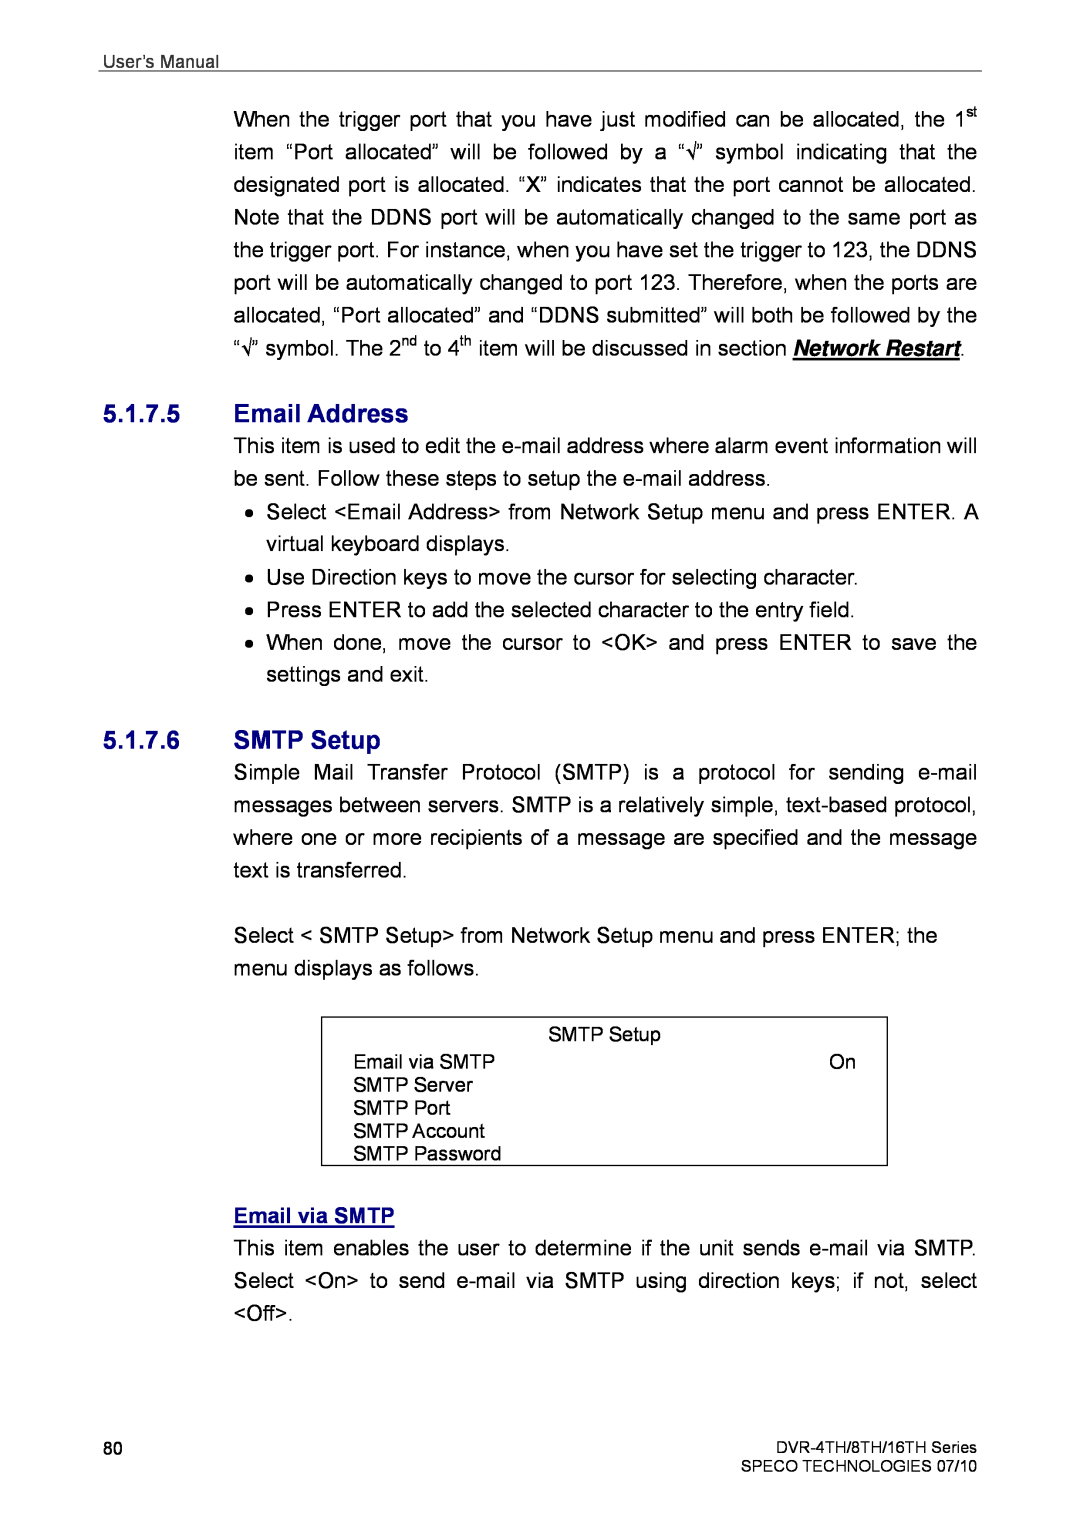 Speco Technologies 8TH, 4TH, 16TH user manual Email Address, SMTP Setup, Email via SMTP 